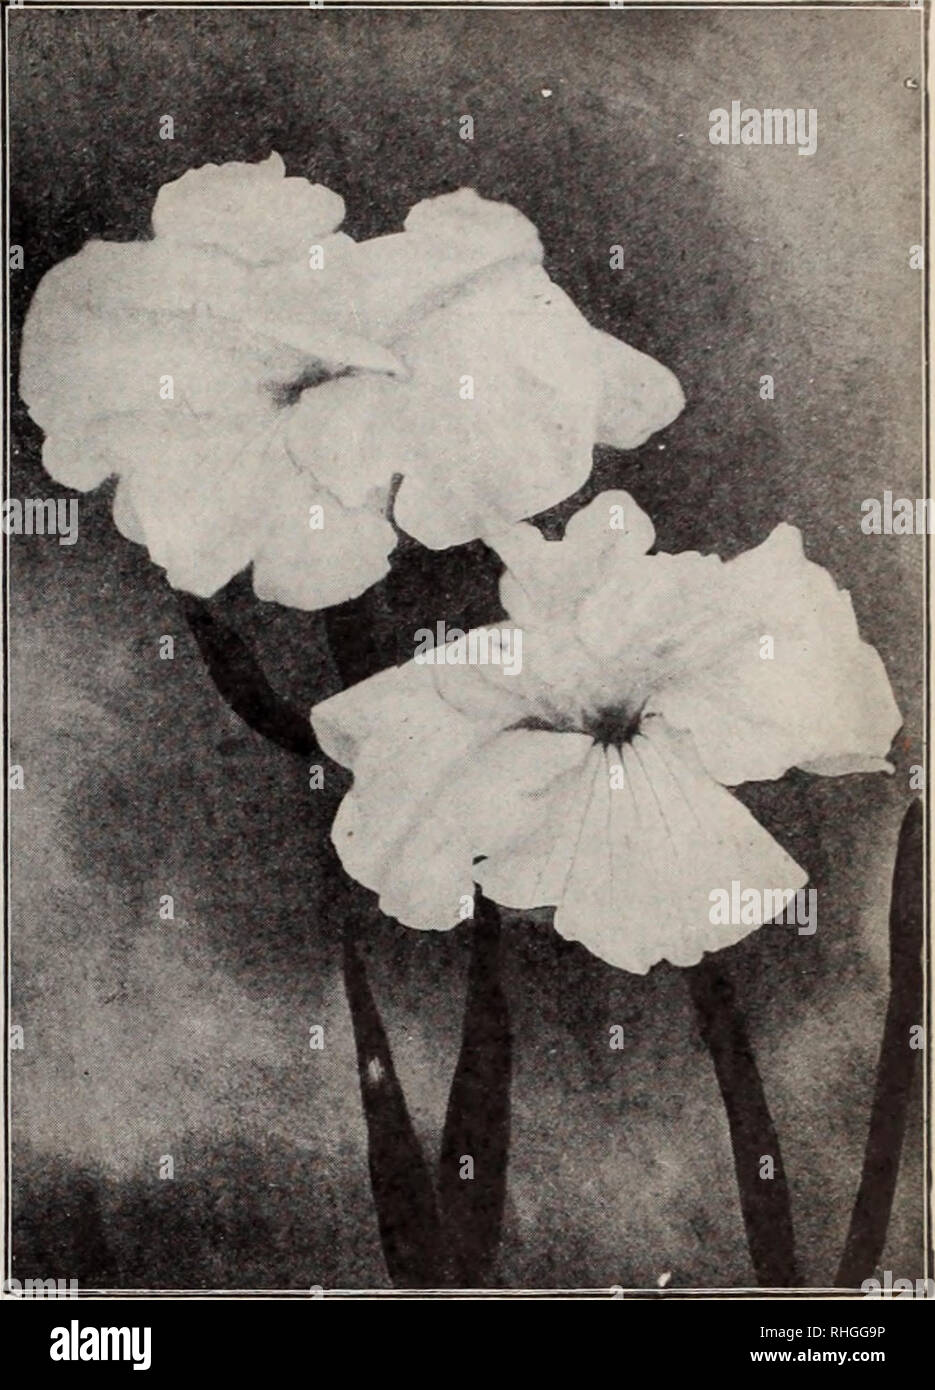 . Boddington's quality bulbs, seeds and plants / Arthur T. Boddington.. Nursery Catalogue. BODDINGTON'S JAPANESE IRIS {Iris Kaempferi) The Japanese Iris is the most showy and strikingly beautiful of all the large family of Iris; ami very few flowers, the orchid not being excepted, surpass this unique flower in size and gorgeousness and variety of color, which ranges from snow-white to the deepest purple, striped, variegated and multicolored in the greatest profusion of coloring. The collections which we offer below are American grown, thor- oughly acclimated and hardy and true to color and nam Stock Photo